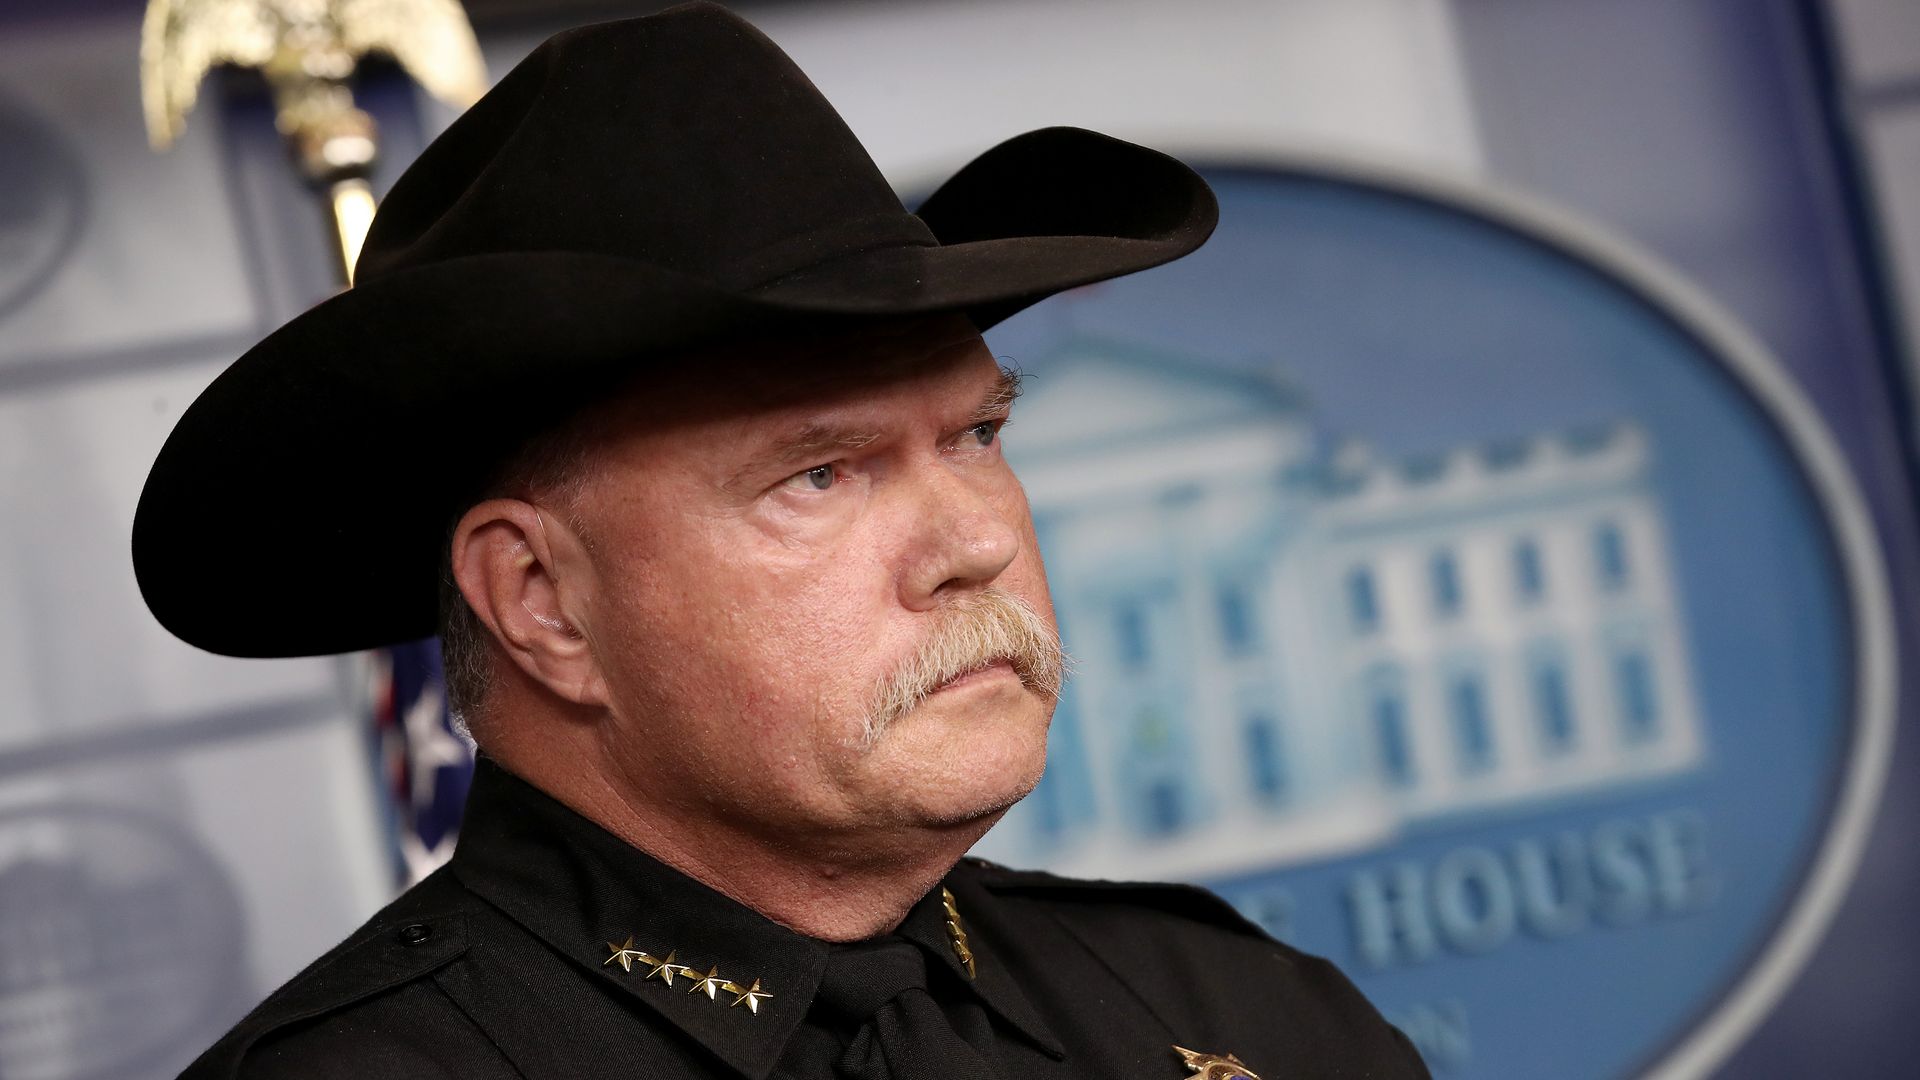 An angry sheriff in a cowboy hat